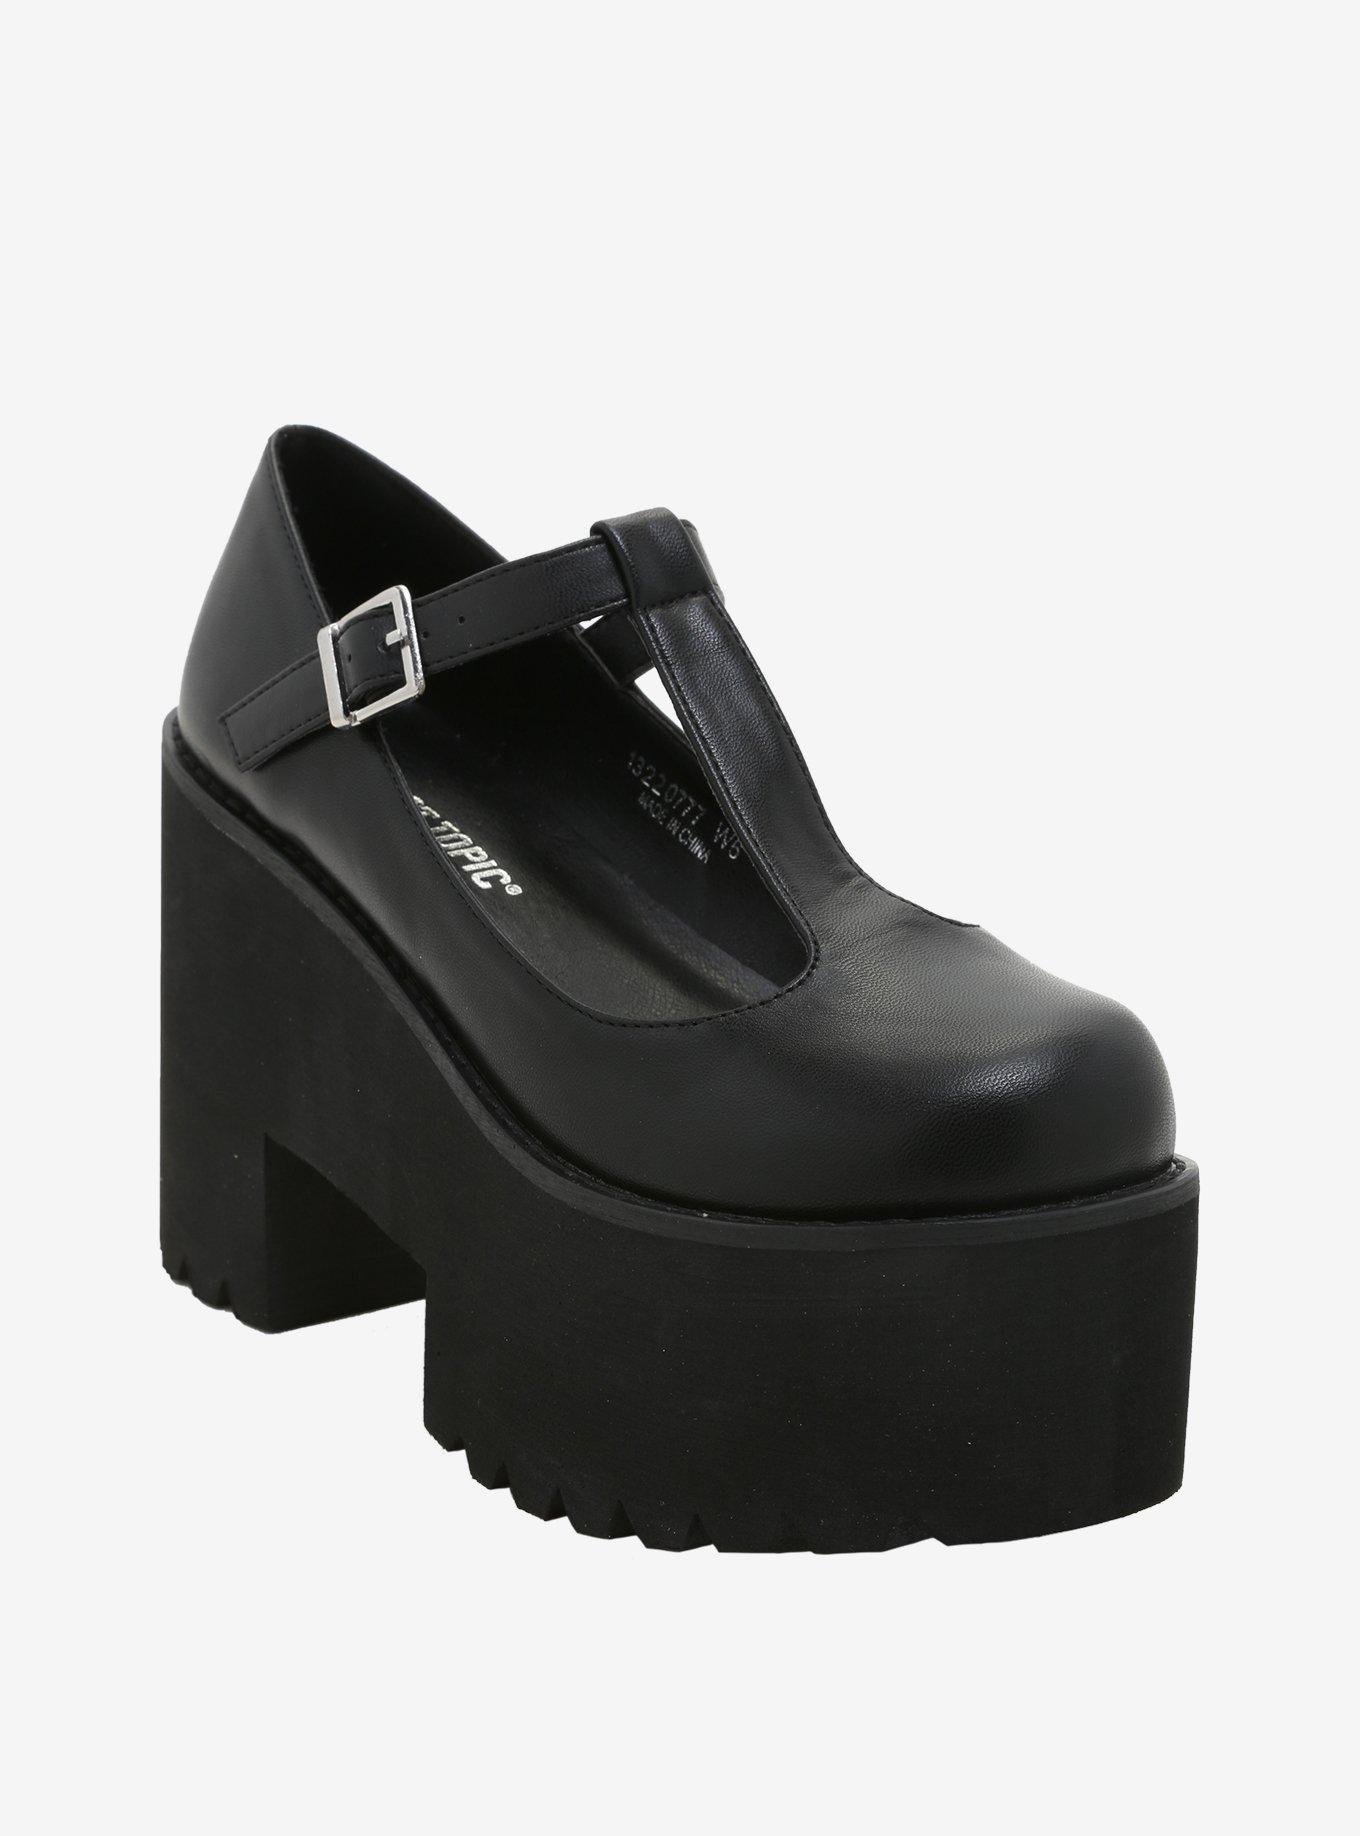 T-Strap Platform Mary Janes | Hot Topic